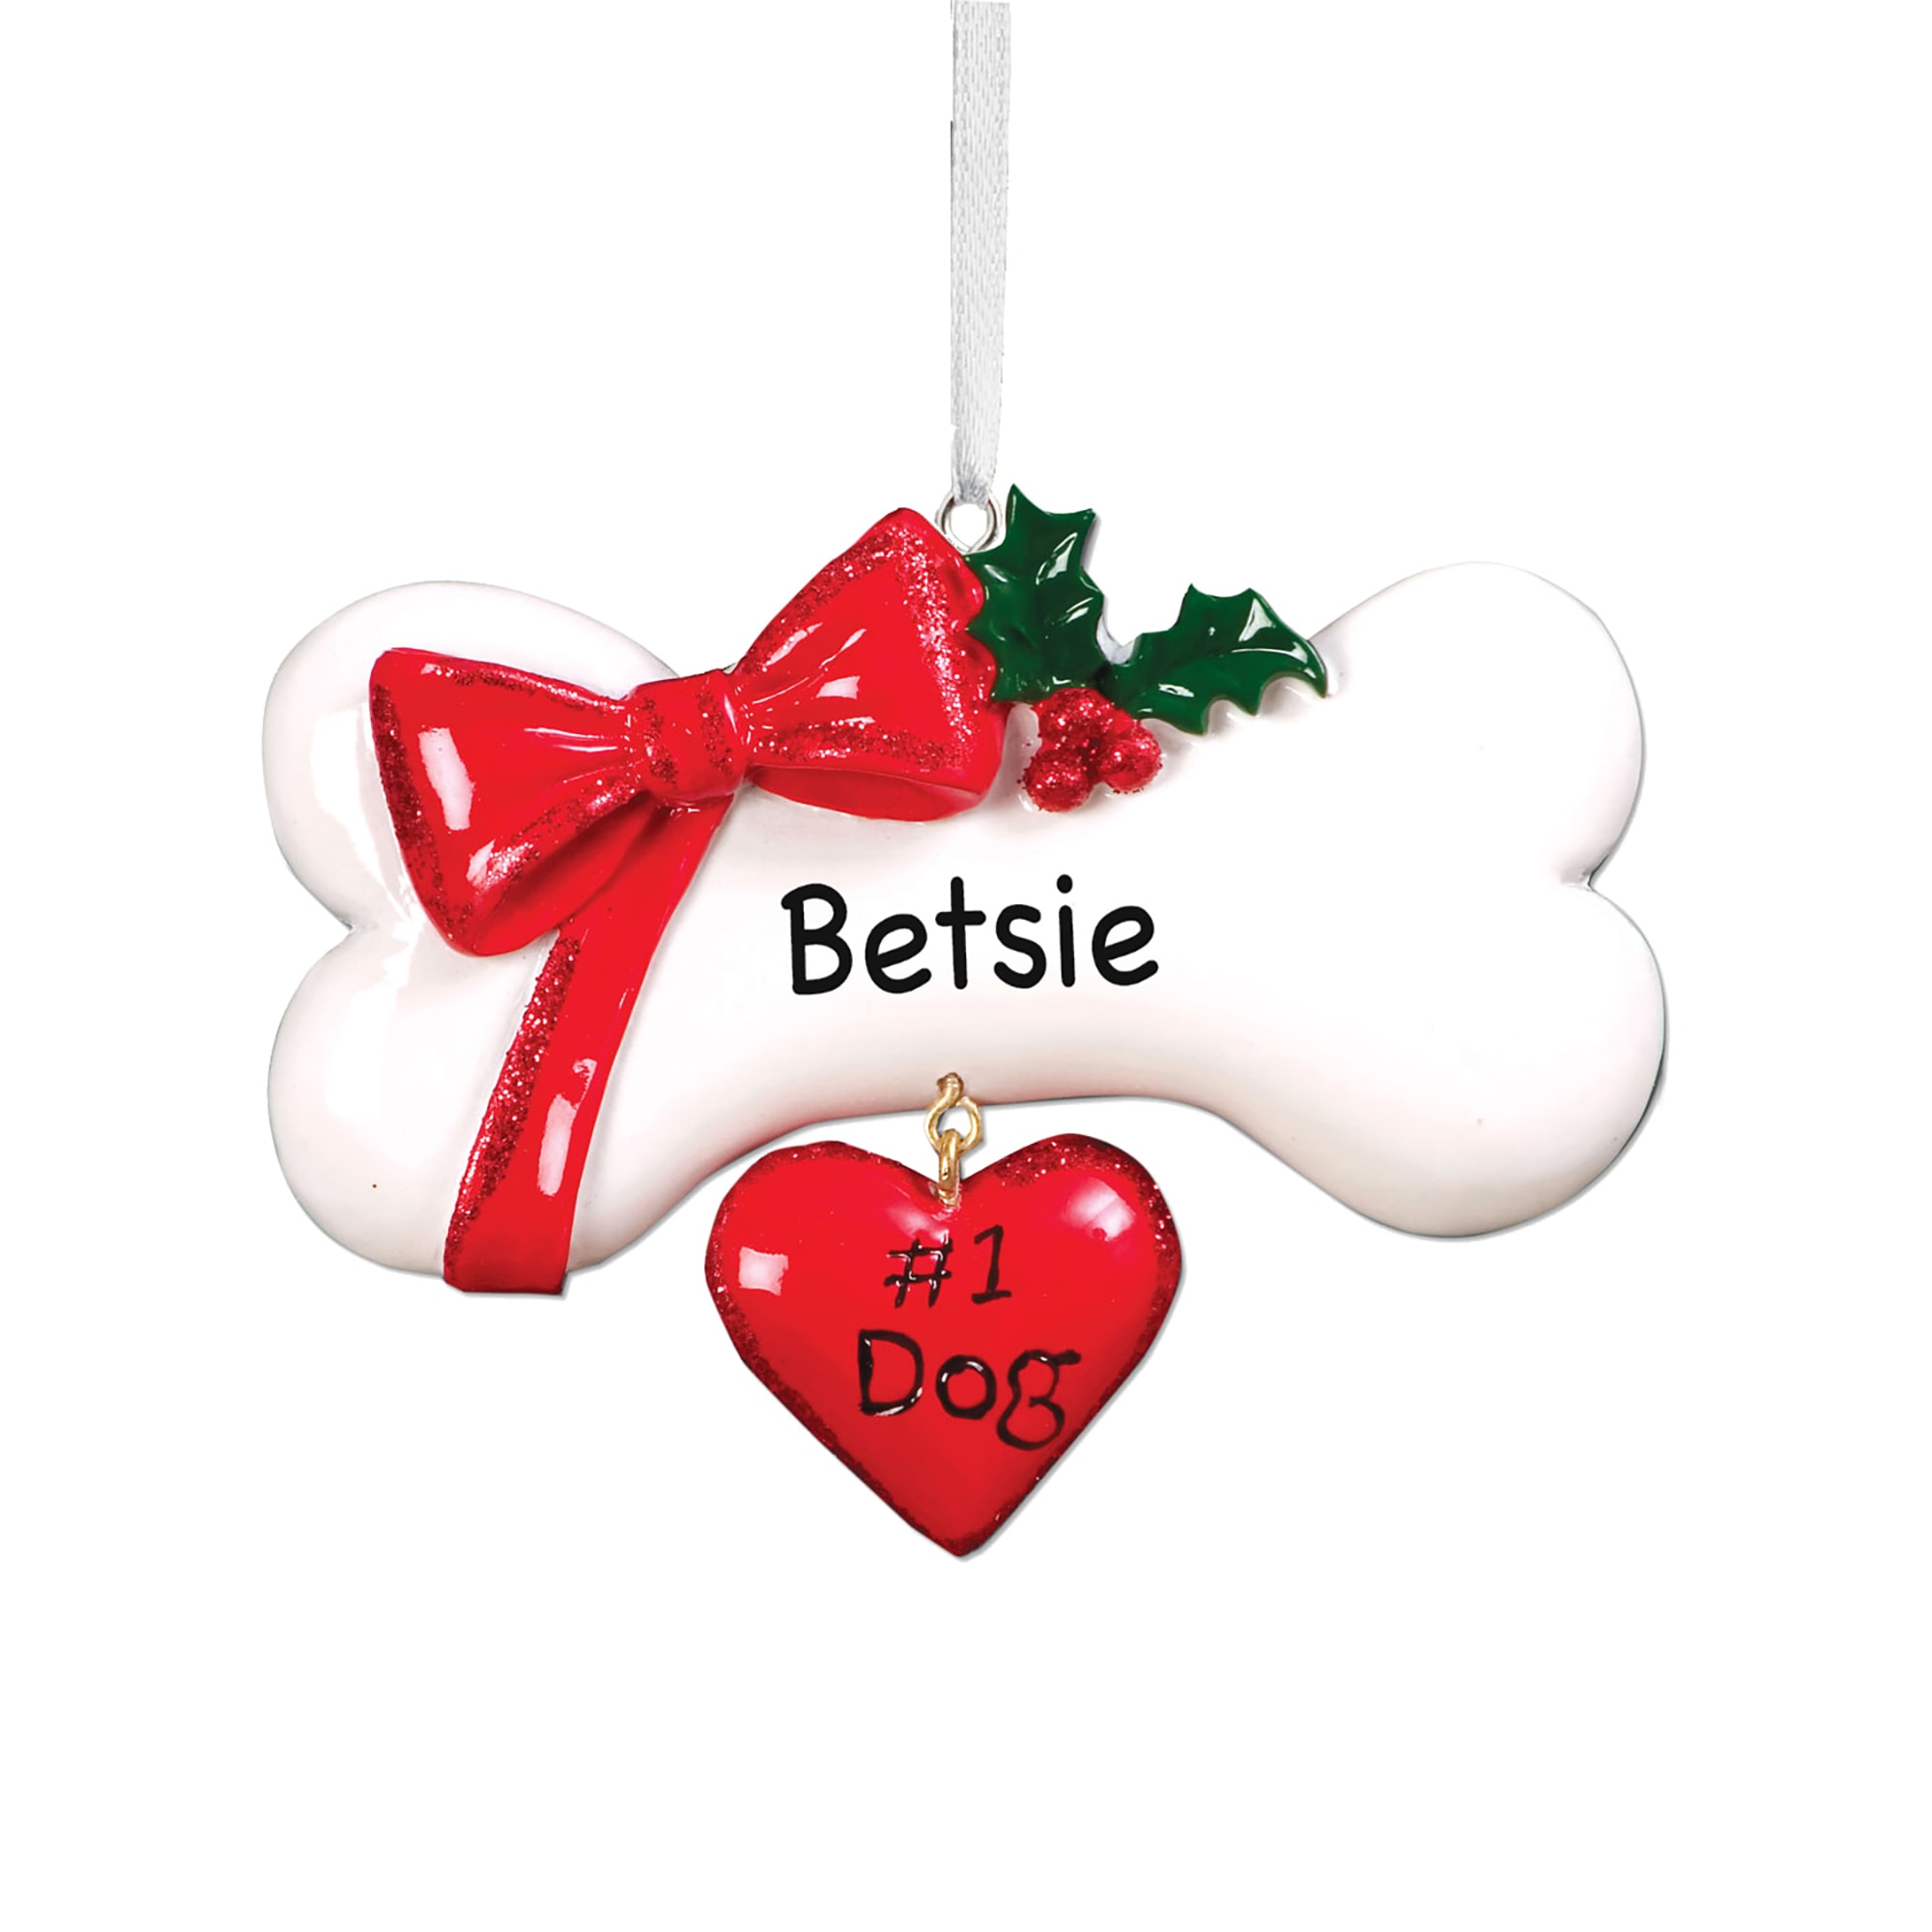 DOG HOUSE with bone~ Personalized Ornament~Custom made~Pets~Hand Personalized Christmas Ornament